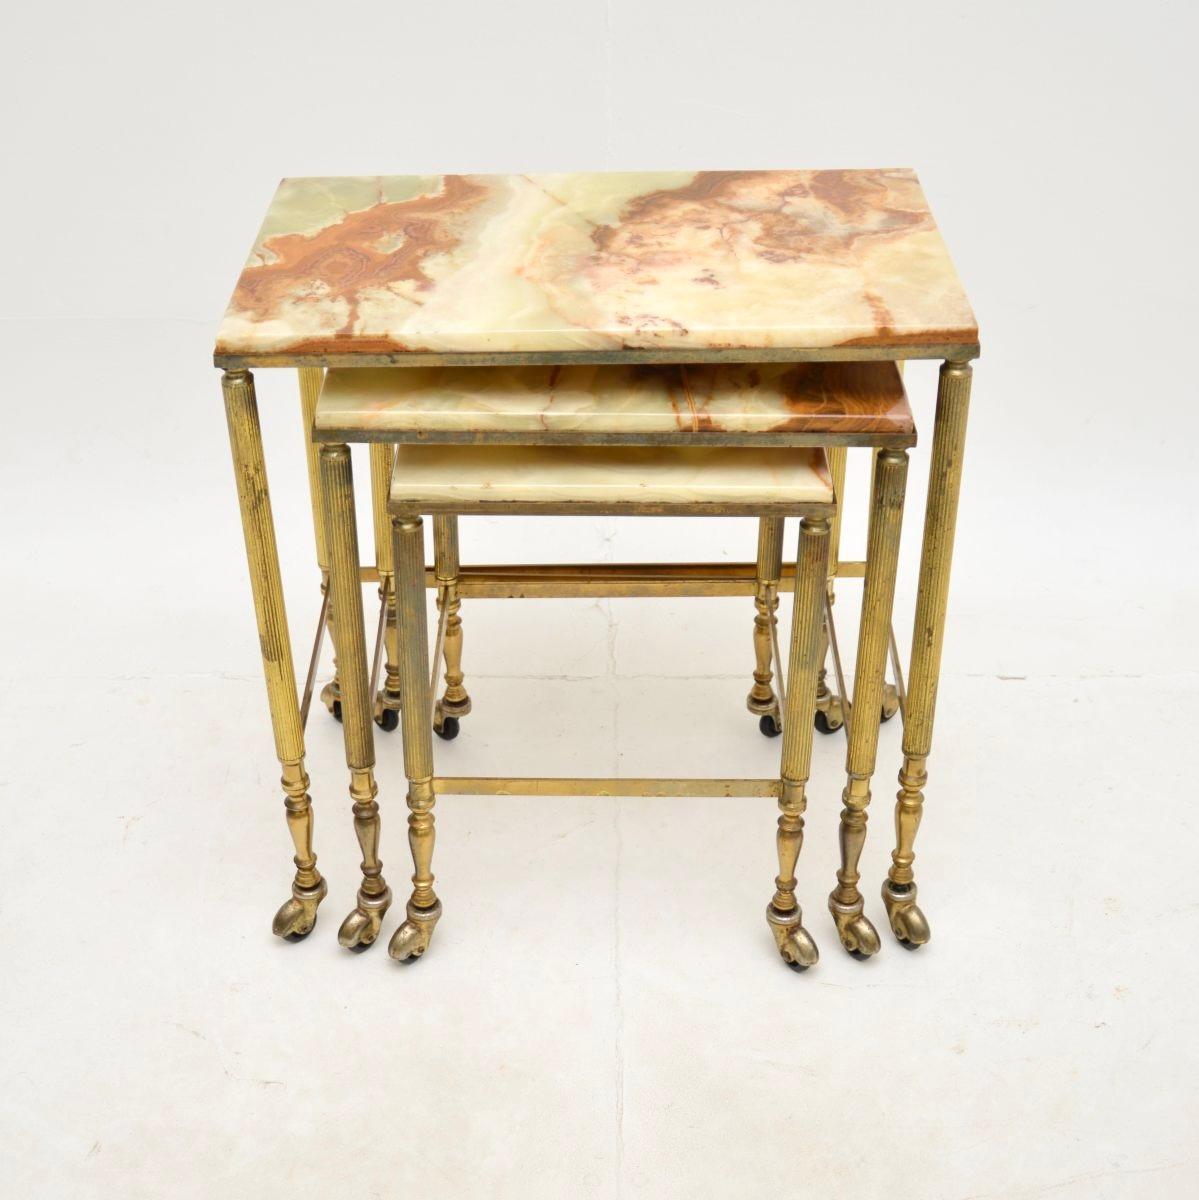 A beautiful antique French brass and onyx nest of tables, dating from around the 1930’s.

They are of superb quality, the solid brass frames have fluted legs, stretchered bases and sit on brass casters. The inset onyx tops are removable, they have